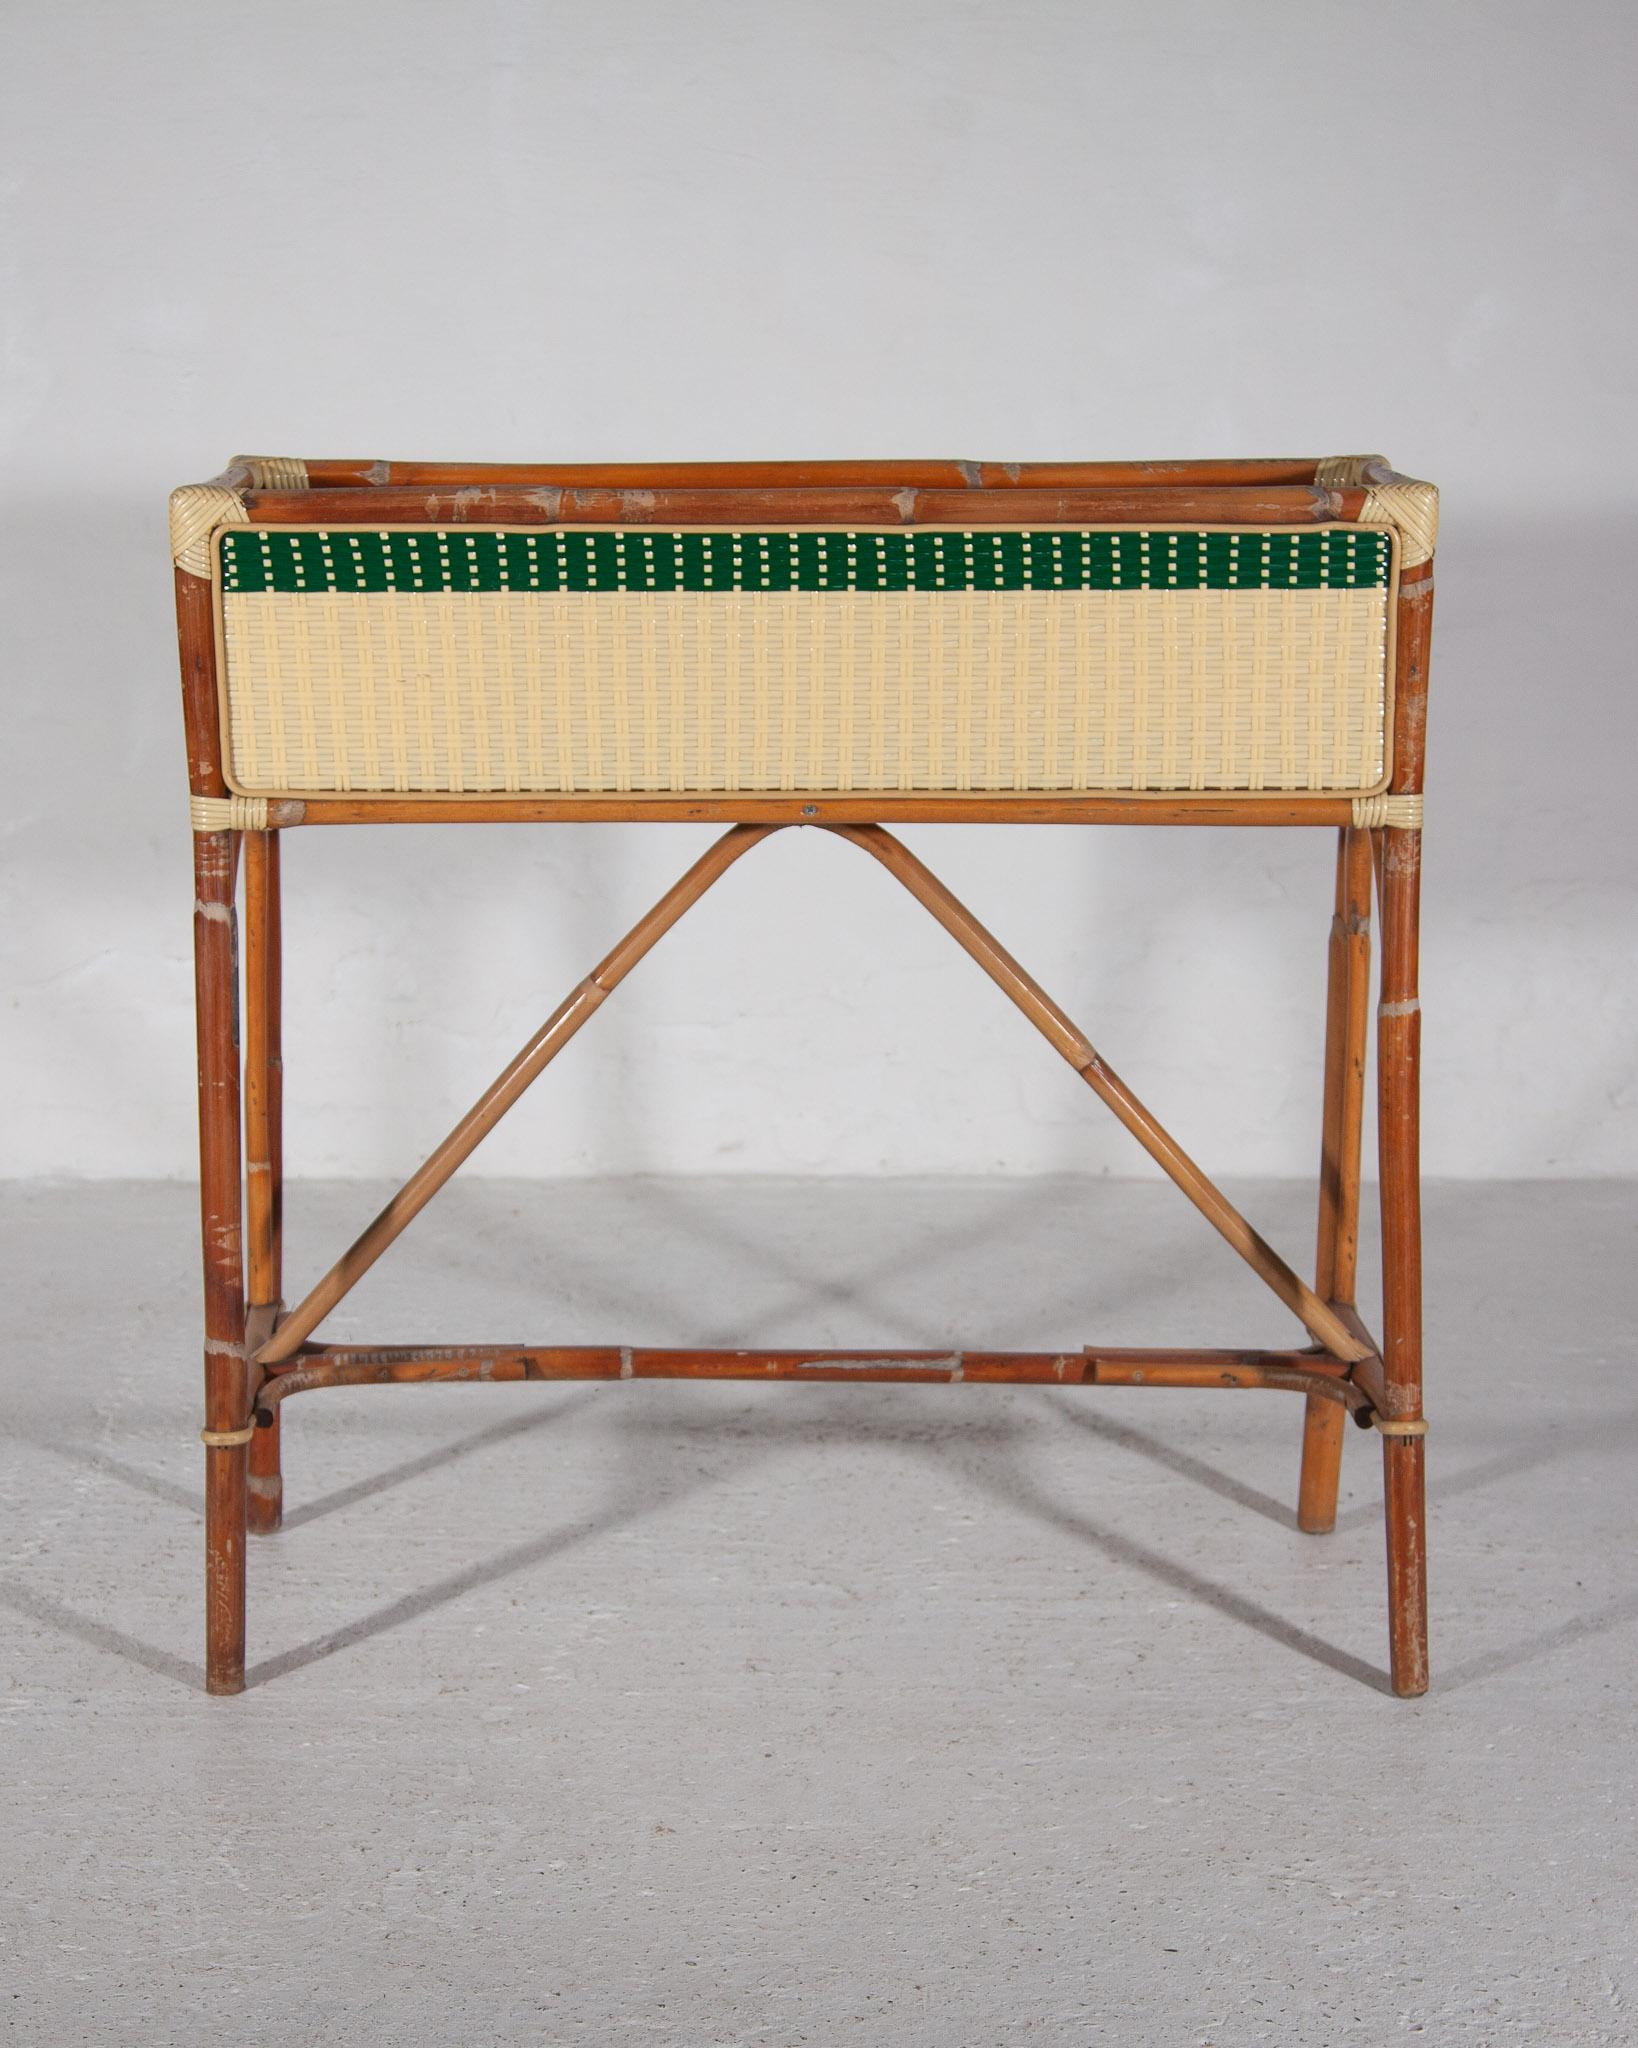 Set of four French bamboo rattan planters by Maison Gatti, 1950s made from a piece of hand-shaped bamboo frame and a rectangular planter with decorative geometric woven resin green and yellow stripes. Made by Parisian artisans since 1920. The